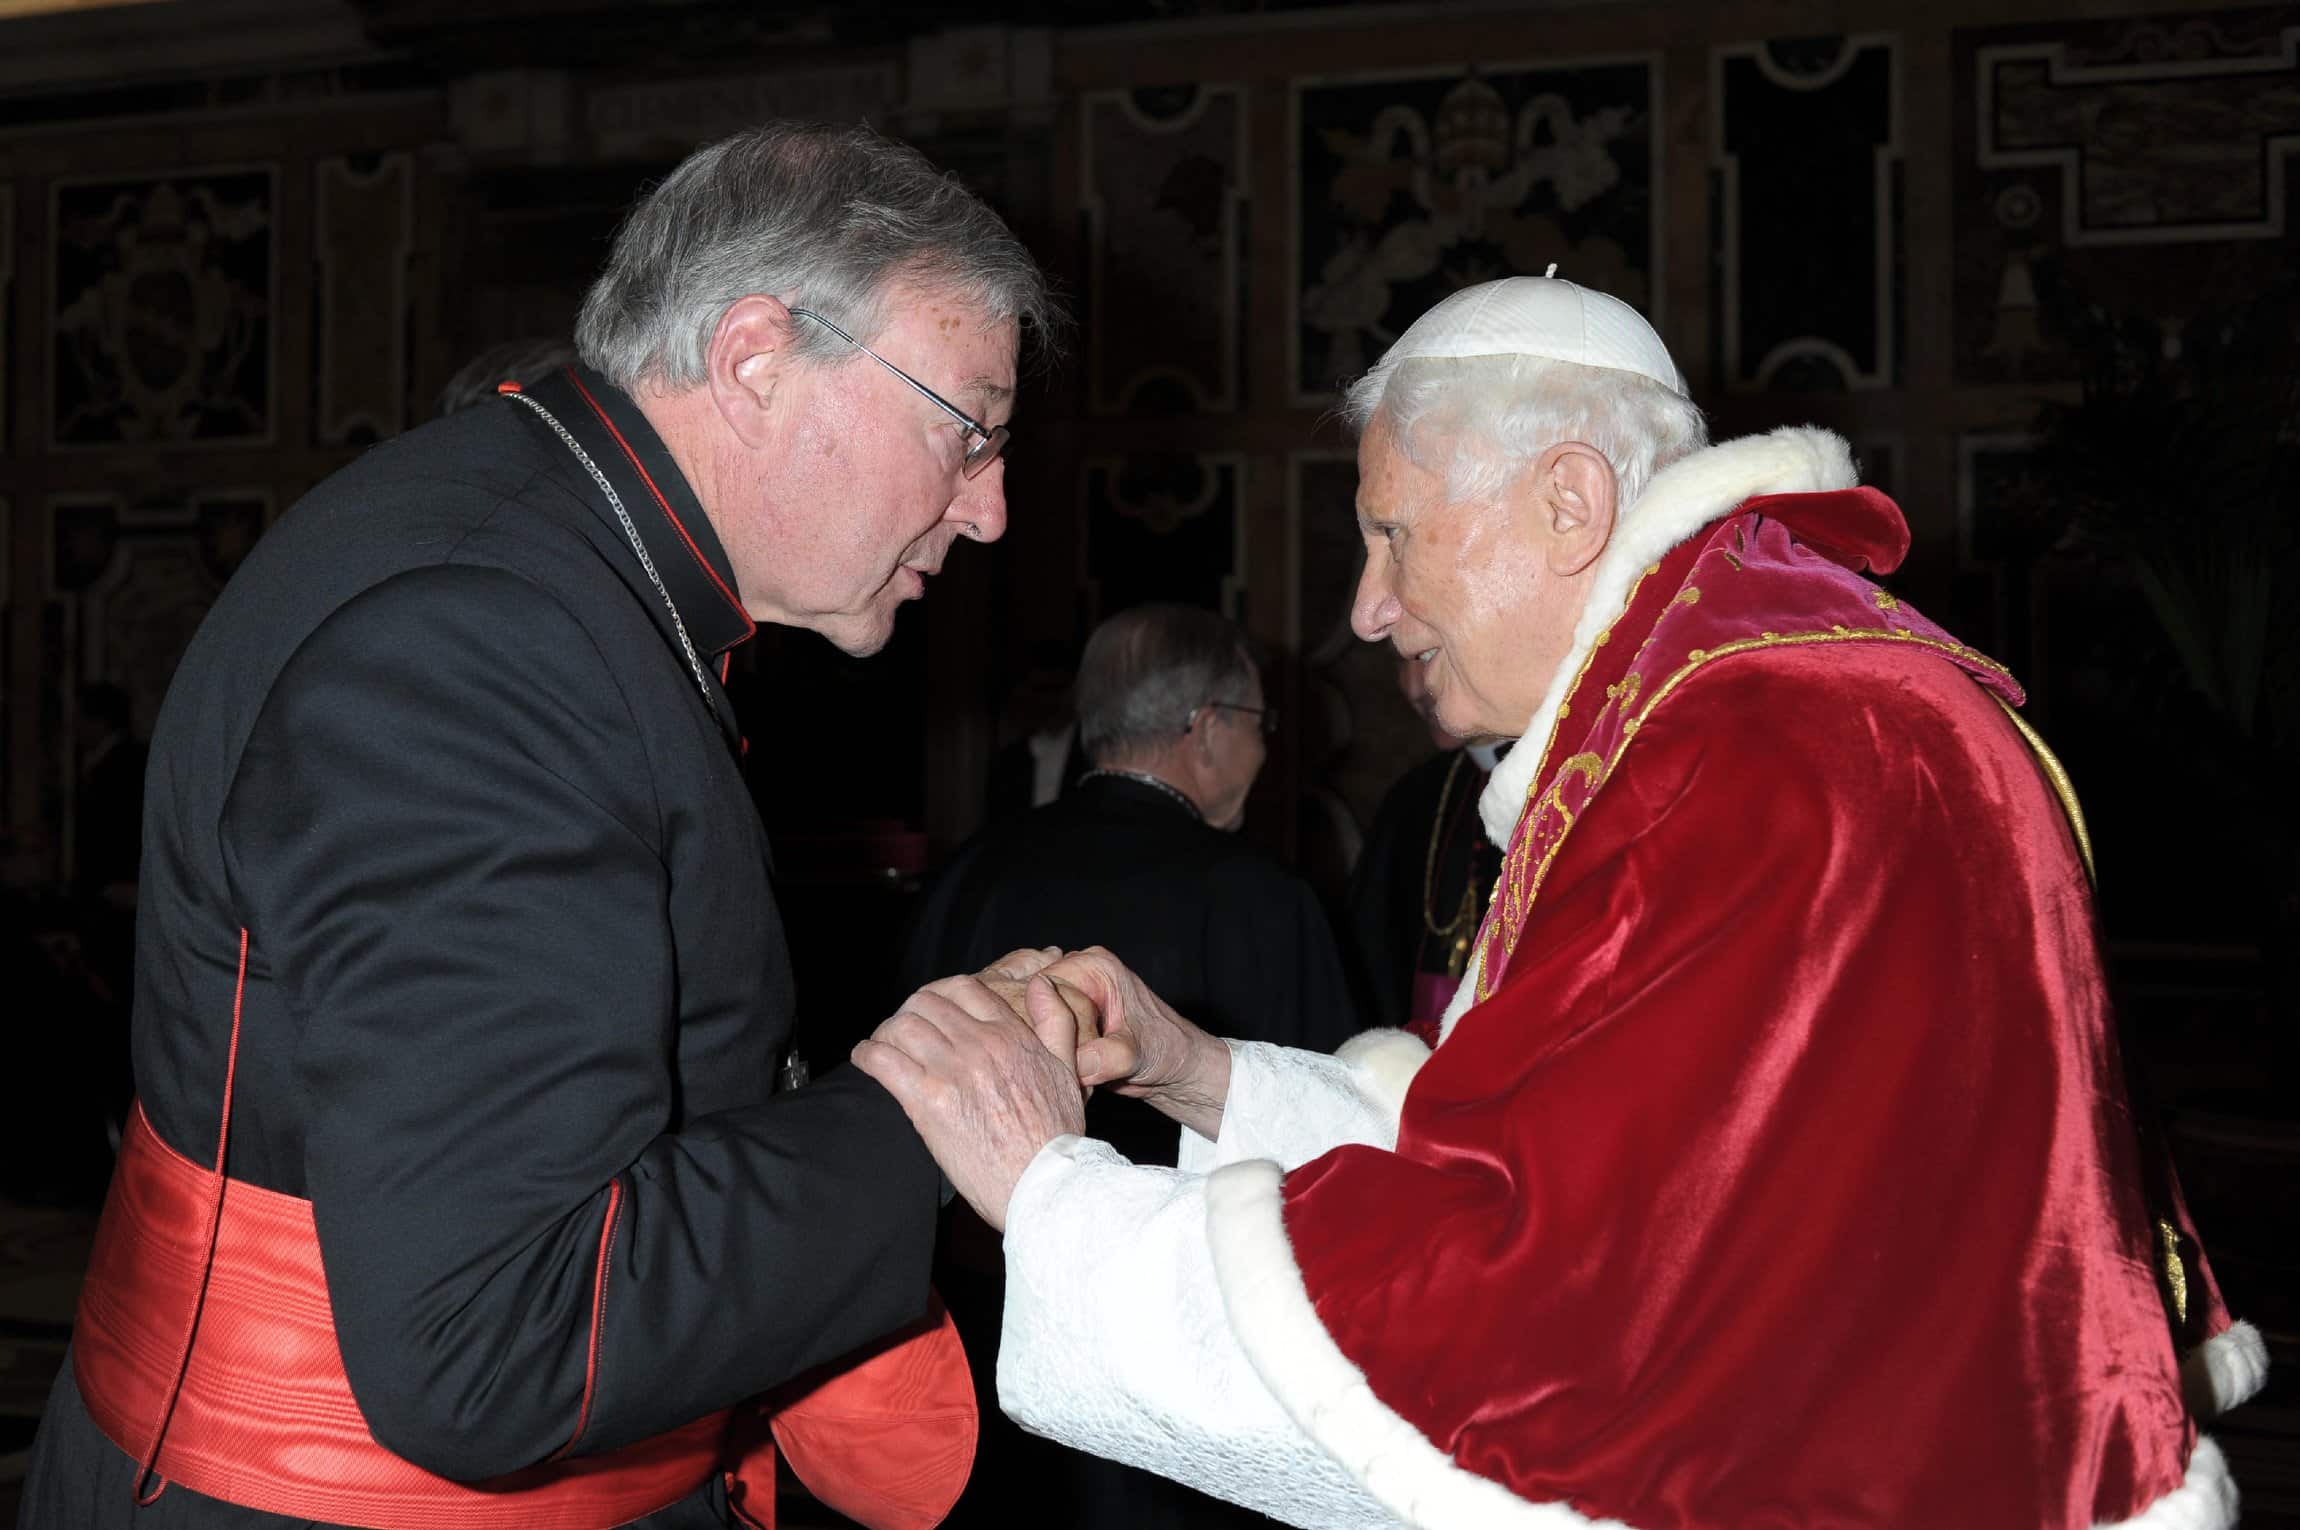 Cardinal George Pell of Sydney exchanges greetings with Pope Benedict XVI as the pope meets for the last time with the College of Cardinals at the Vatican Feb. 28. (CNS photo/L'Osservatore Romano) (March 1, 2013) See POPE-CARDINALS Feb. 28, 2013.